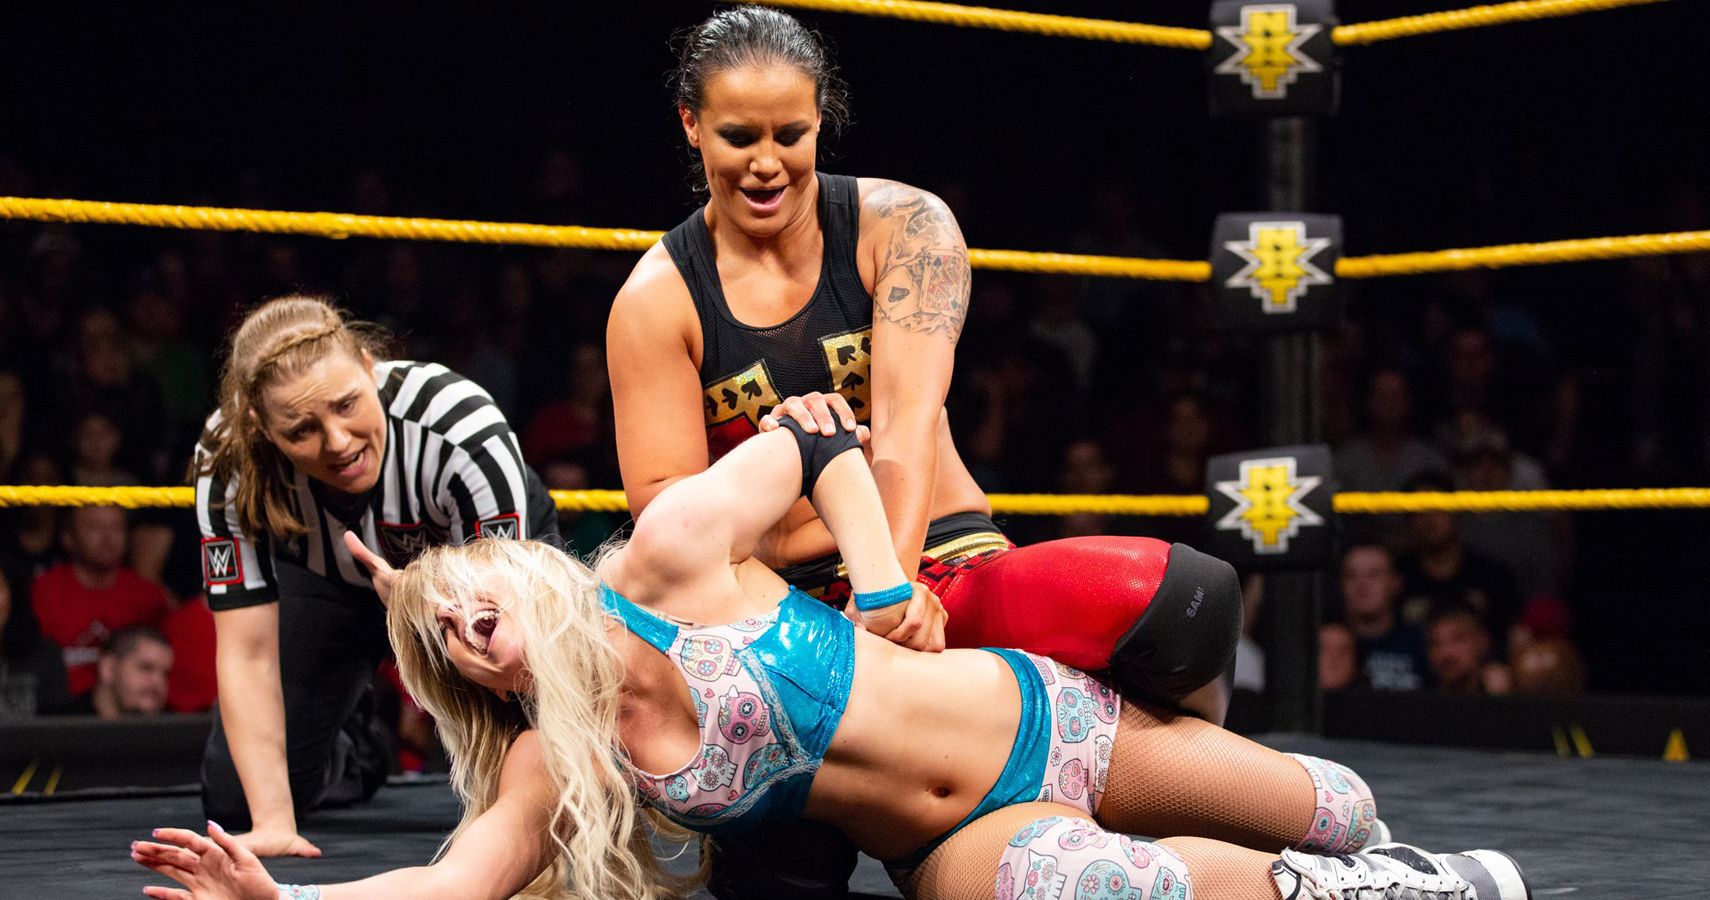 10 WWE Female Superstars Who Could Break Out In 2019